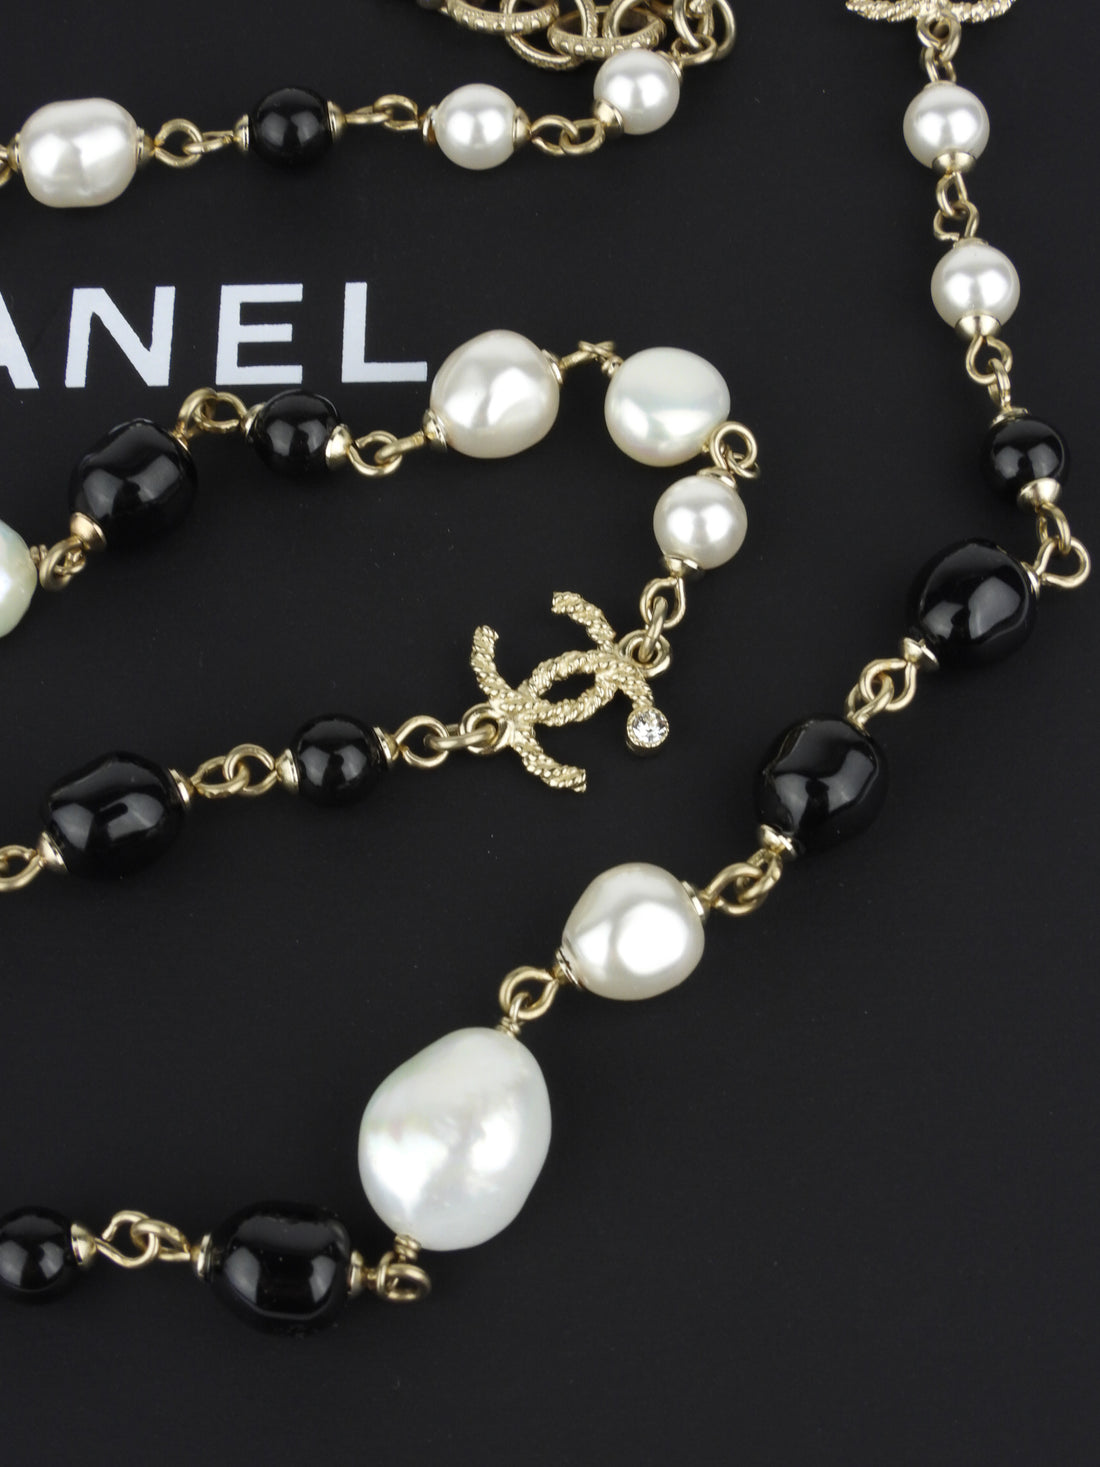 Chanel 19B Pearl, Black, Crystal and Gold Tone CC Long Chain Necklace